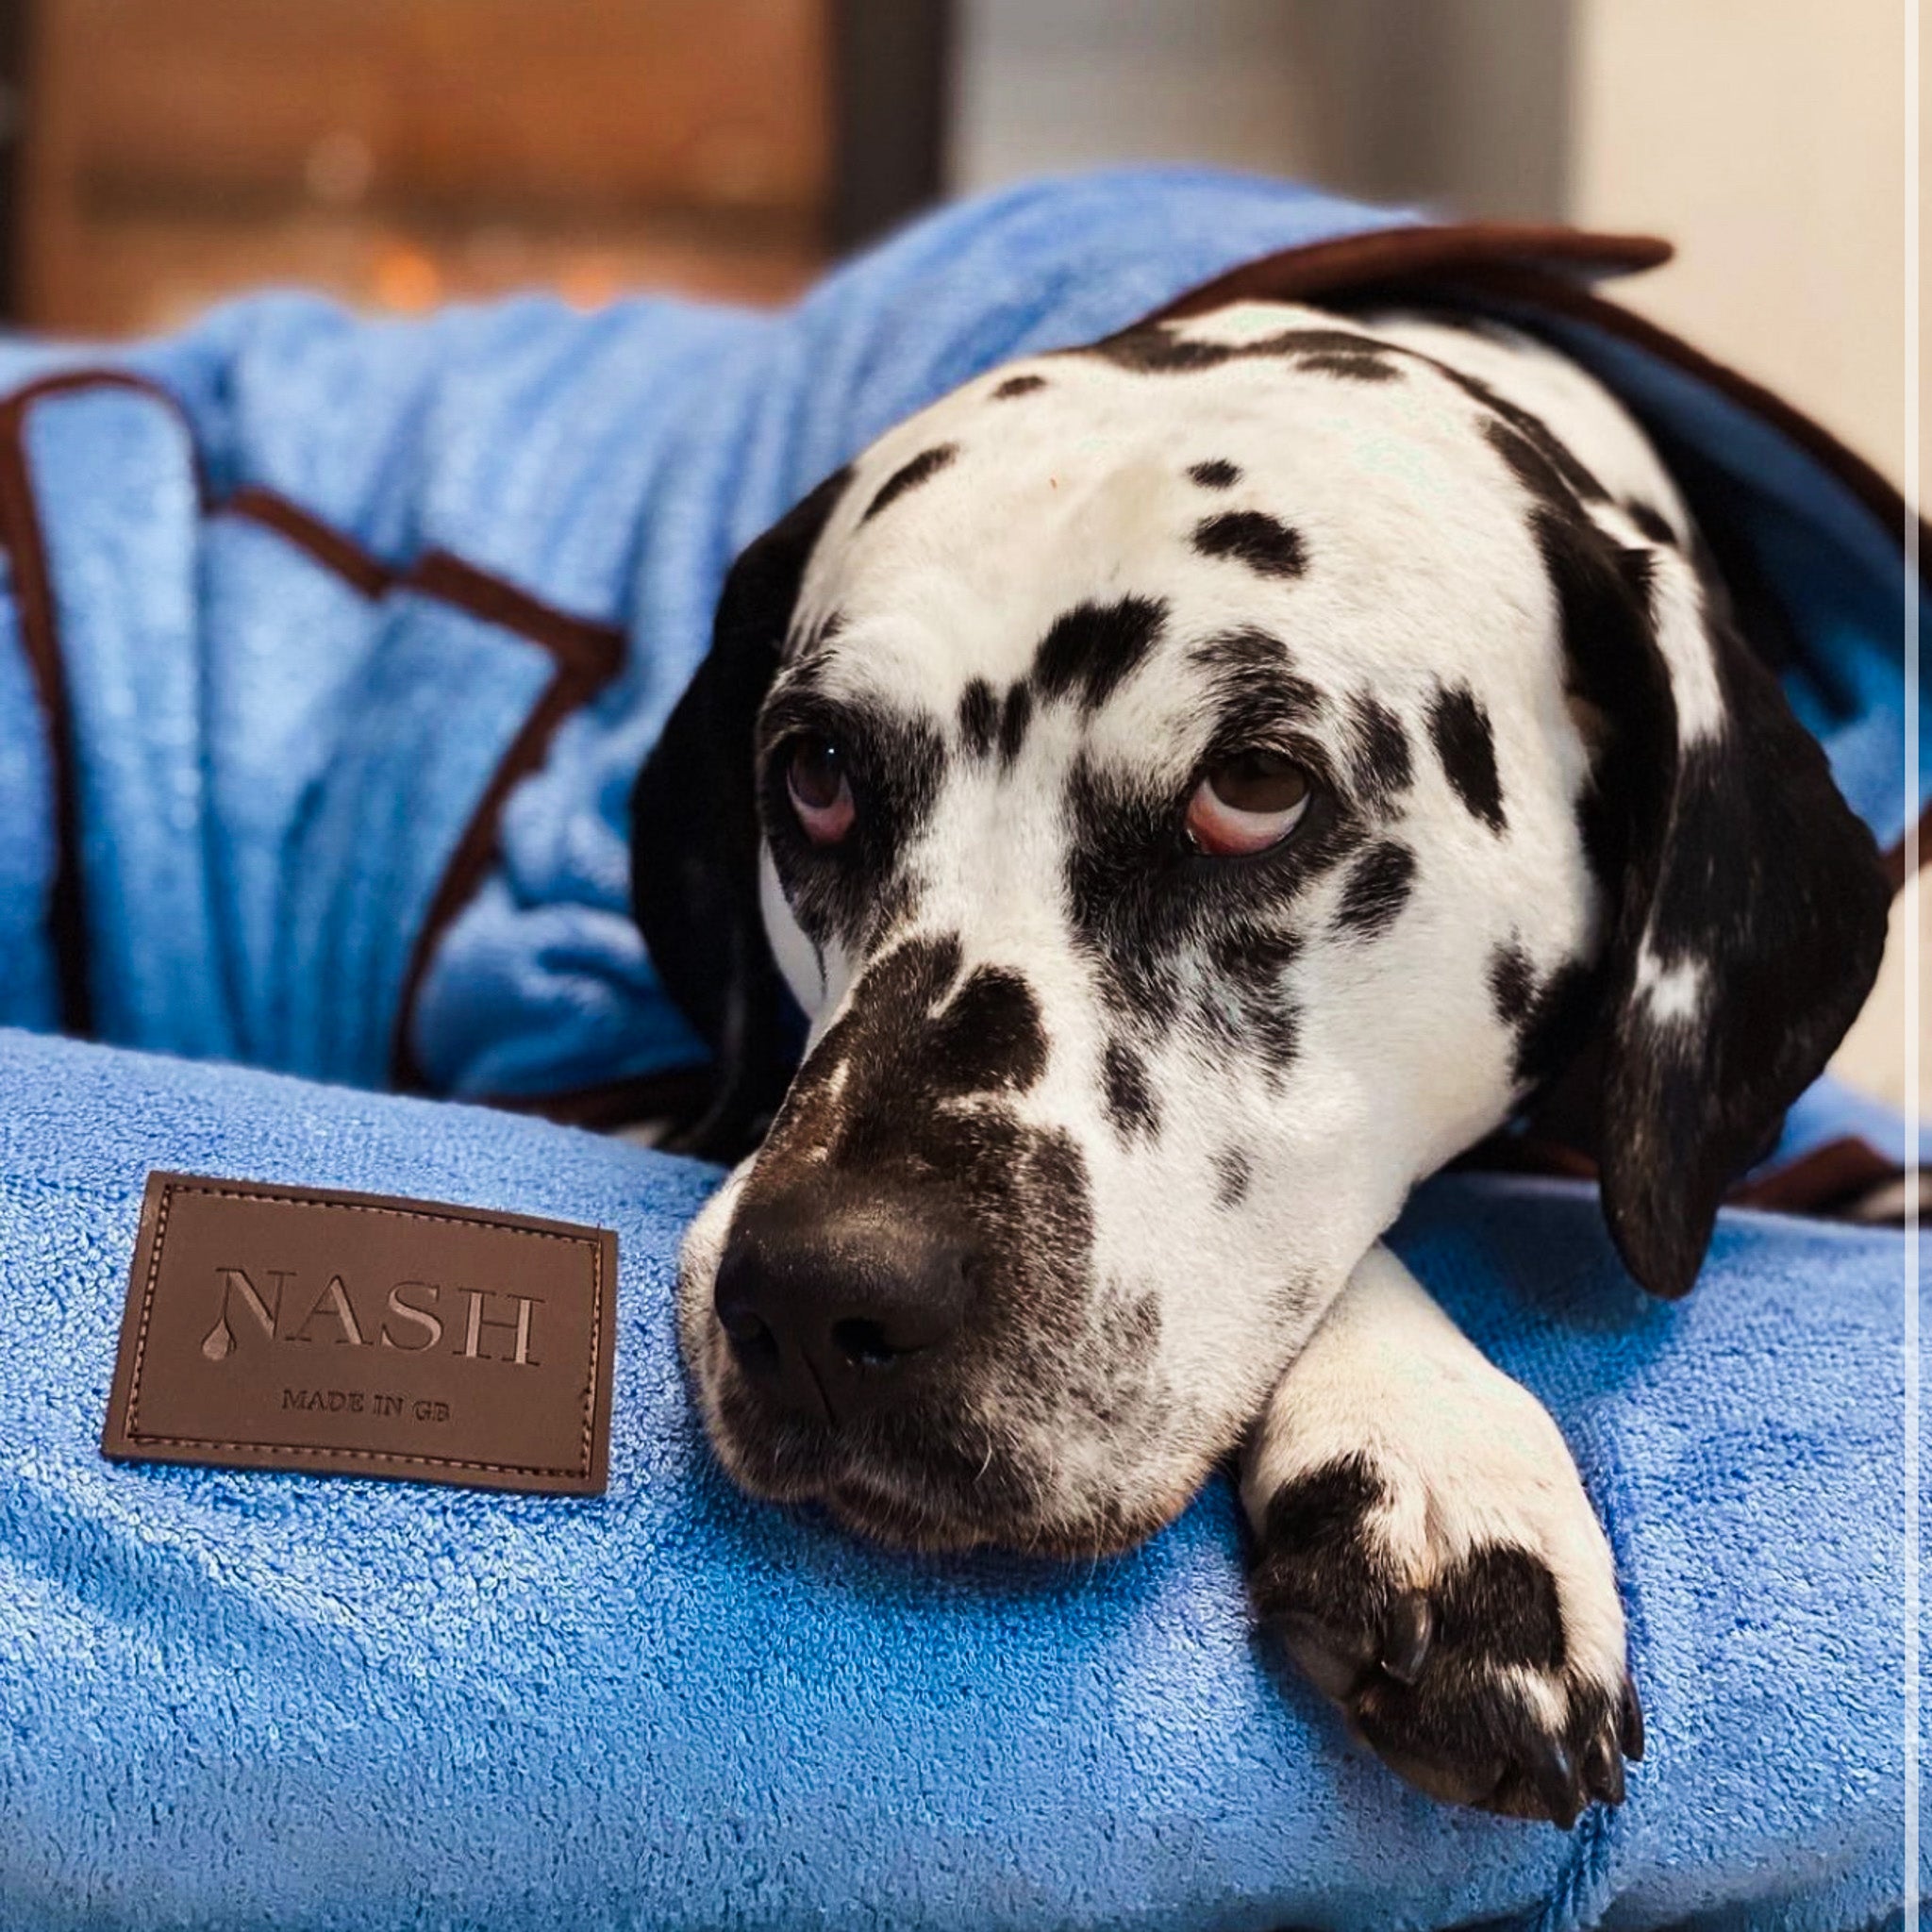 Dalmatian resting on a Cambridge blue NASH bamboo dog throw, also wearing the matching NASH dog drying coat.